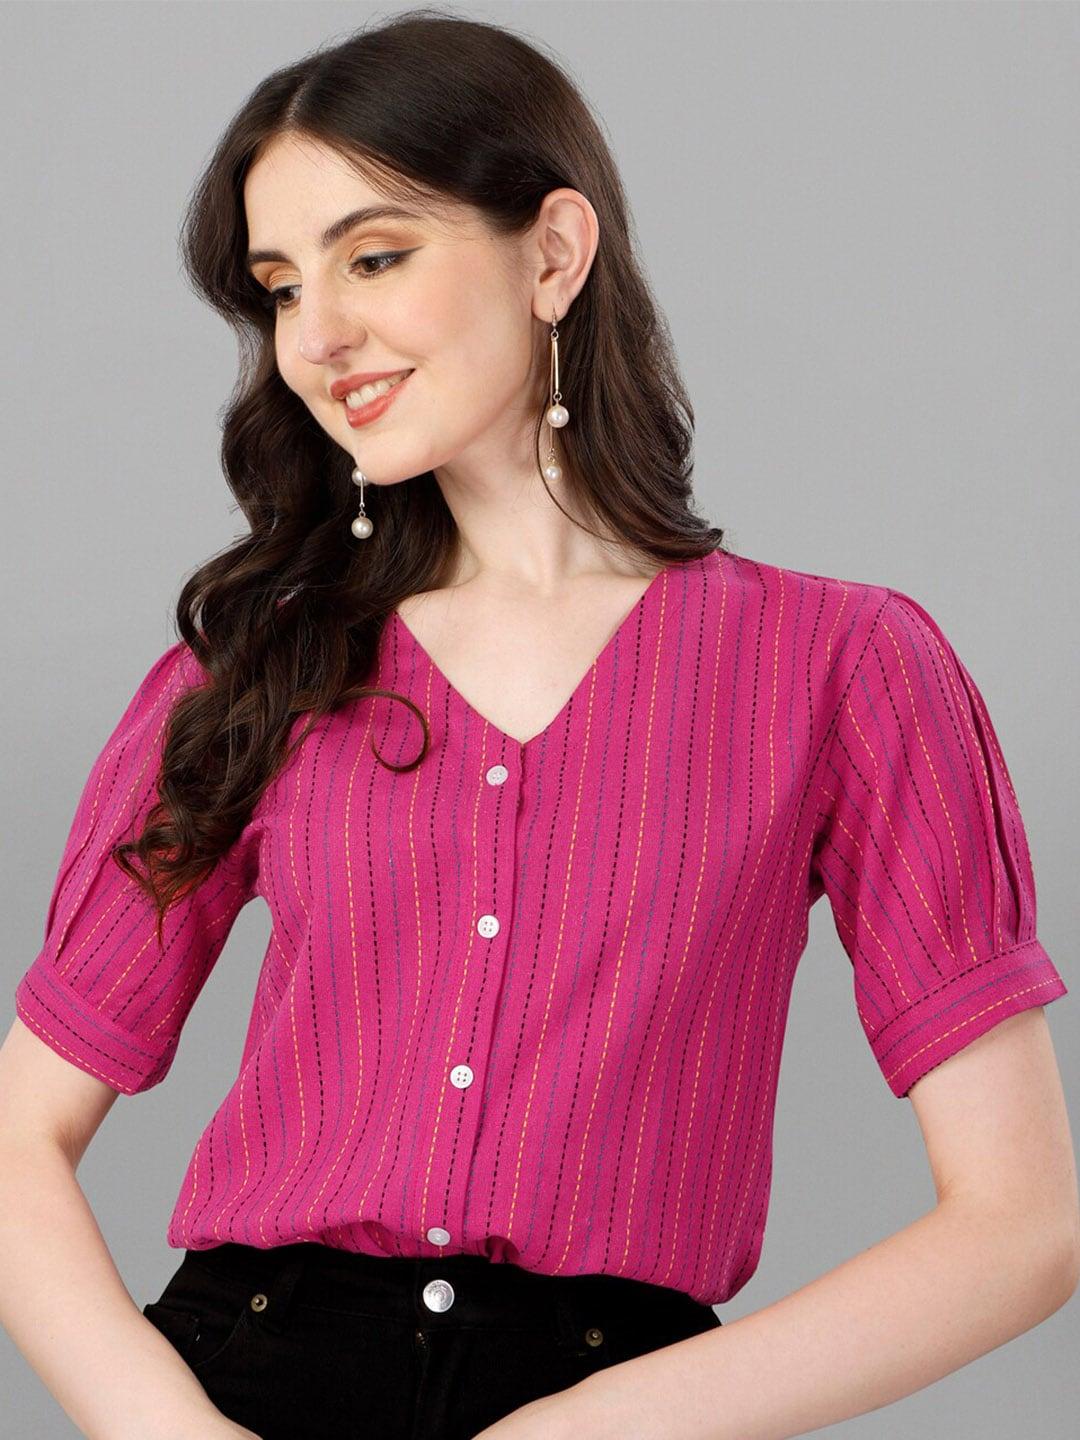 kinjo-striped-puff-sleeve-shirt-style-cotton-top